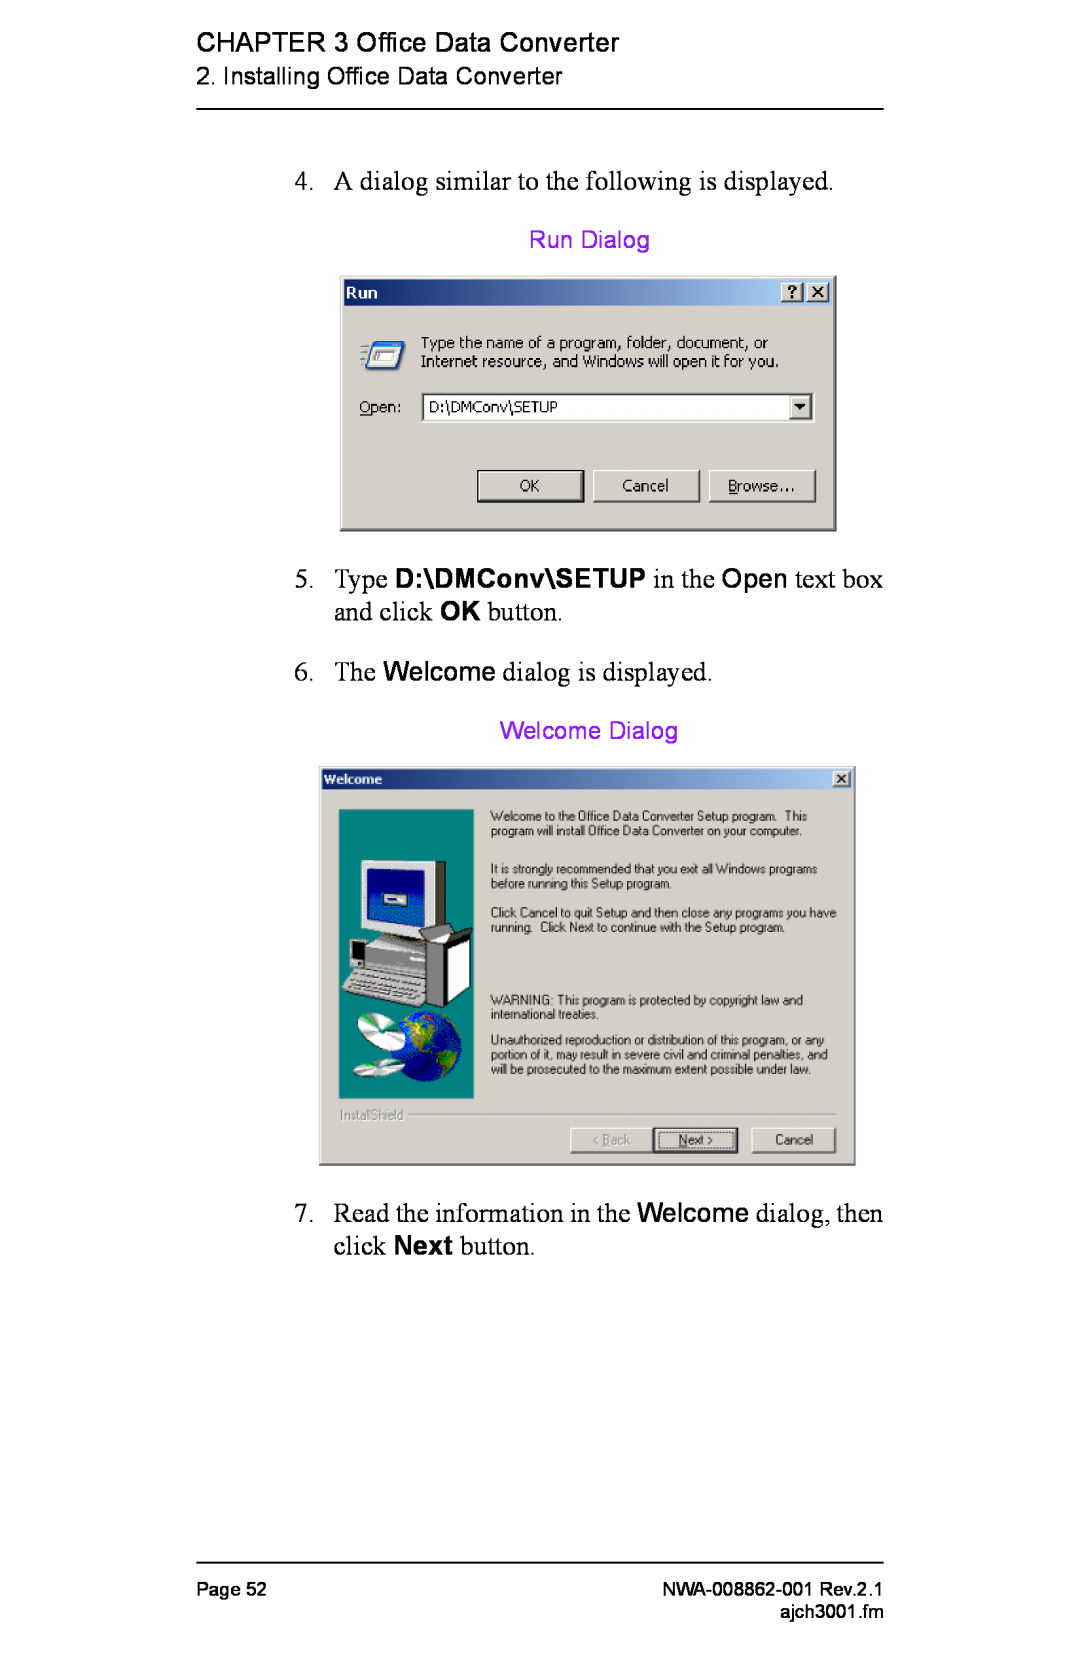 NEC manual Installing Office Data Converter, Run Dialog, Welcome Dialog, Page, ajch3001.fm, NWA-008862-001 Rev.2.1 